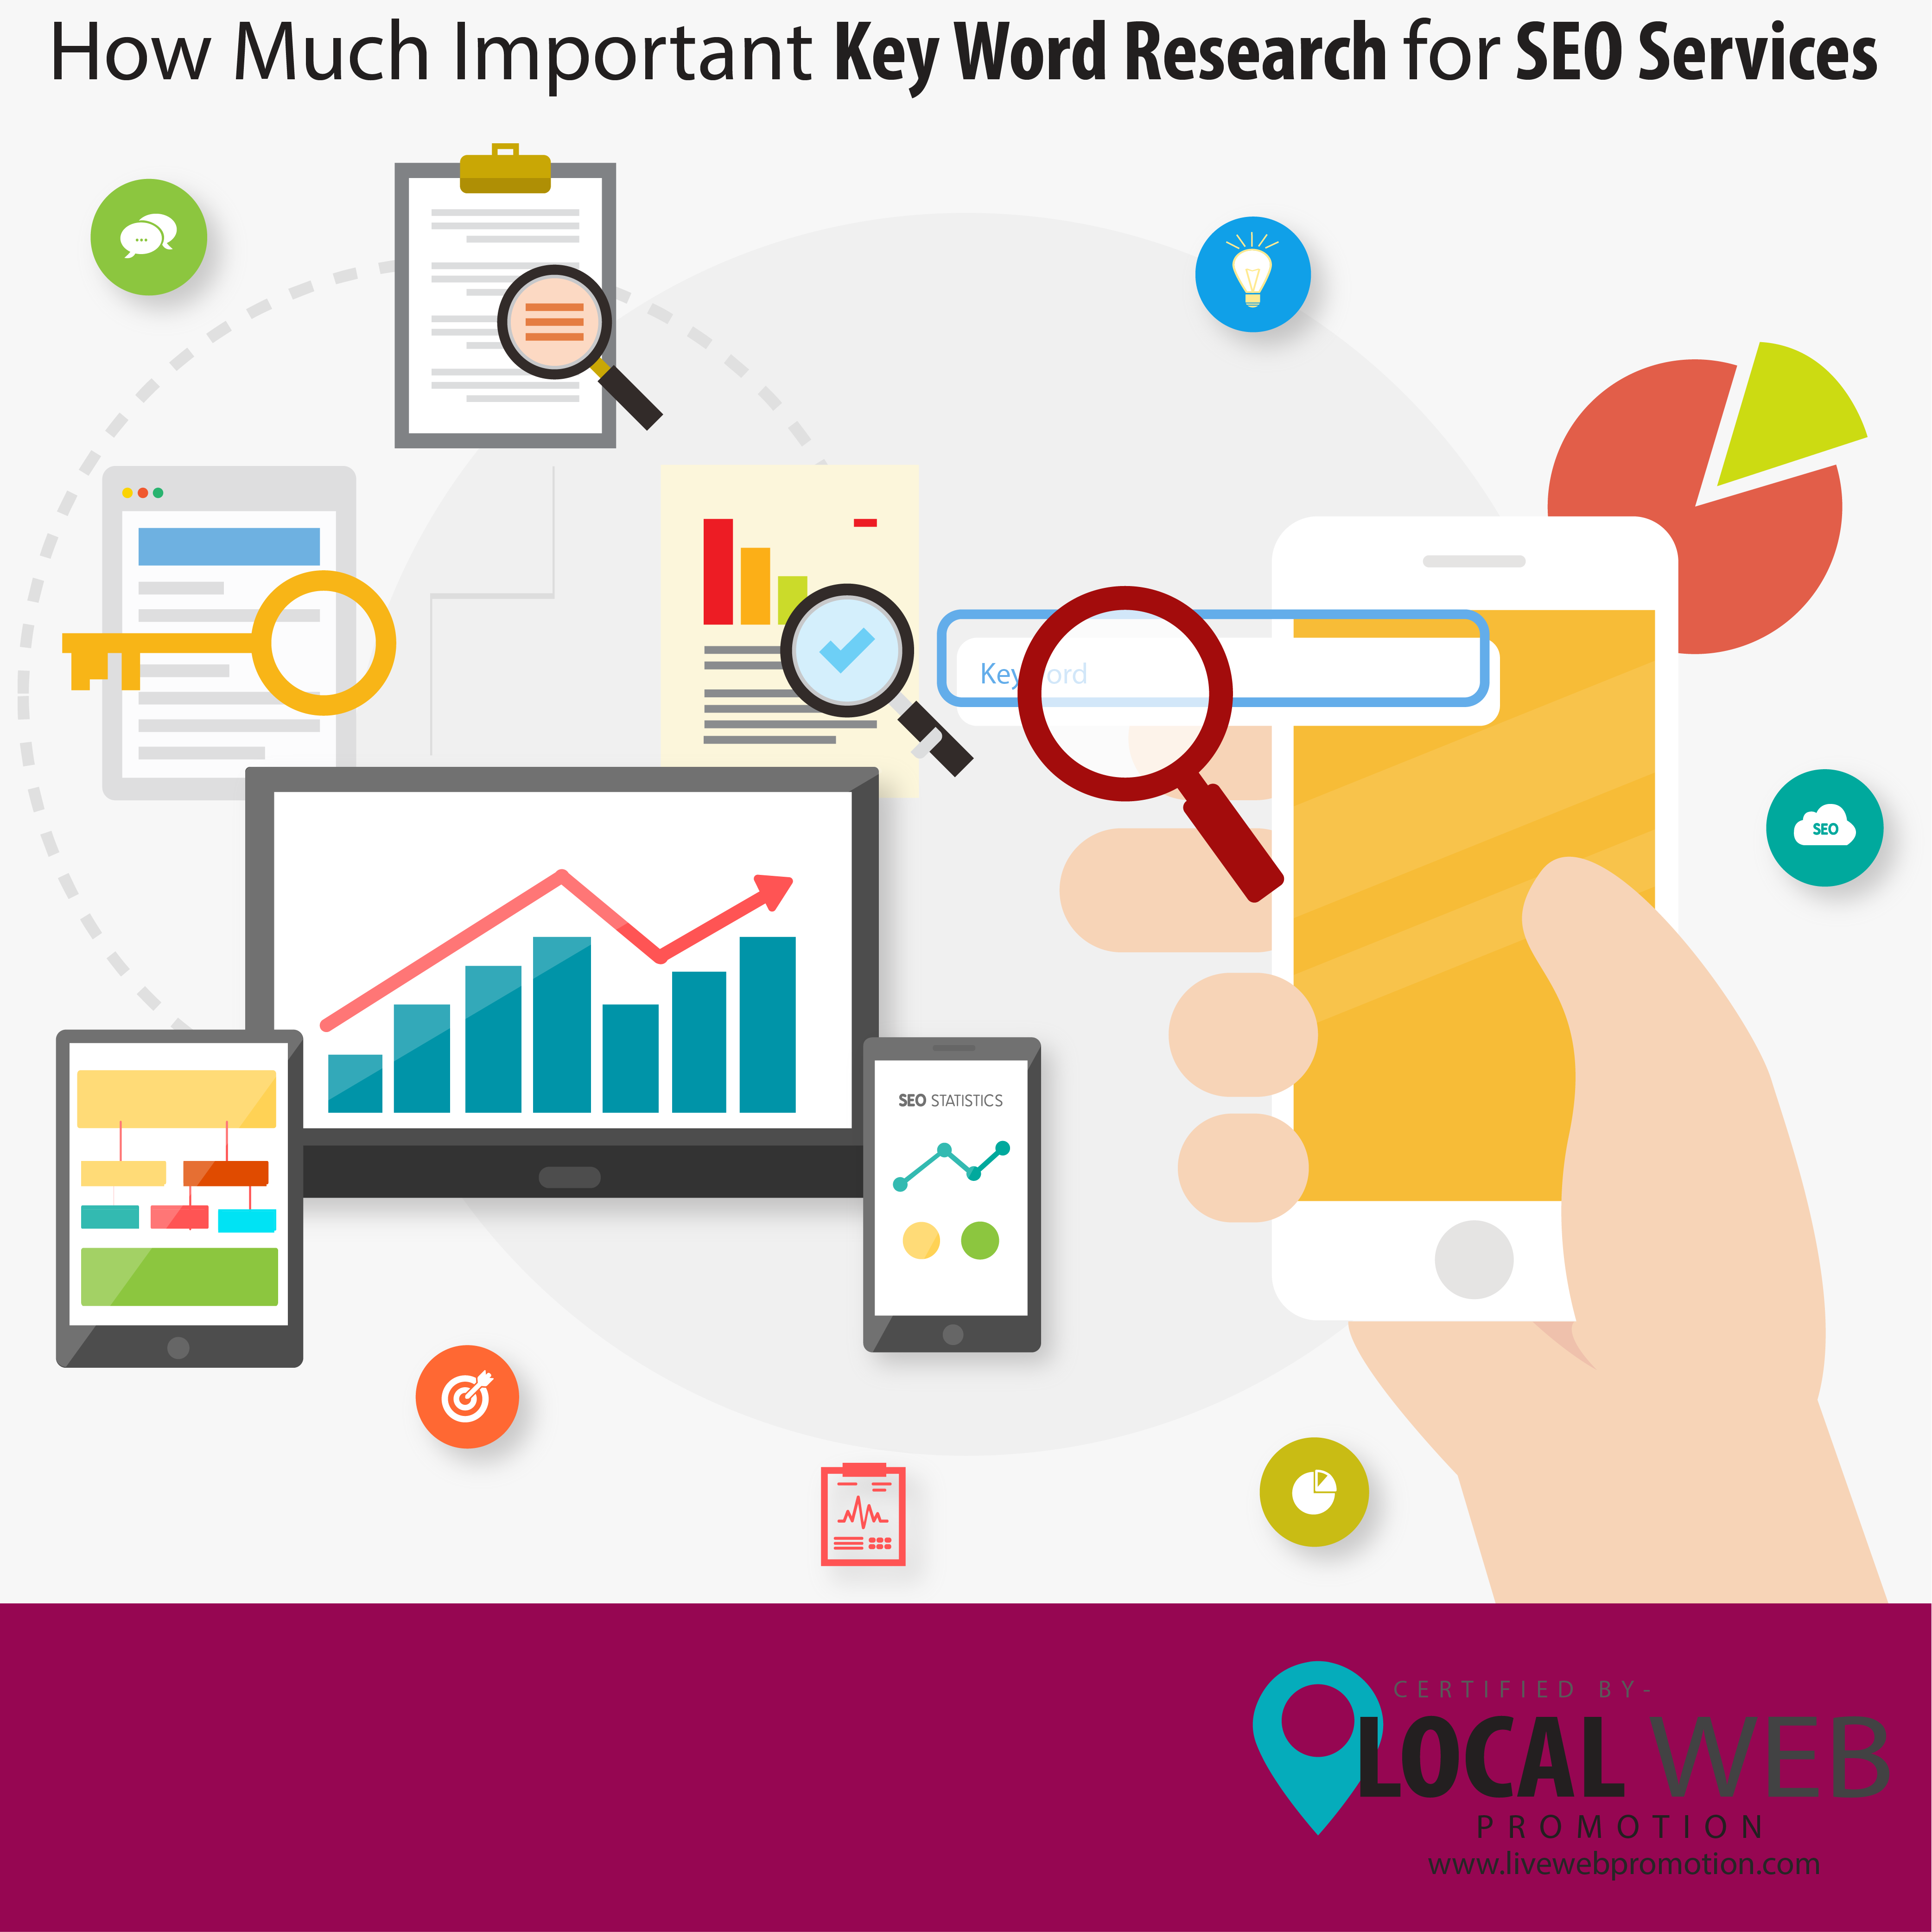 How Much Important Key Word Research for SEO Services